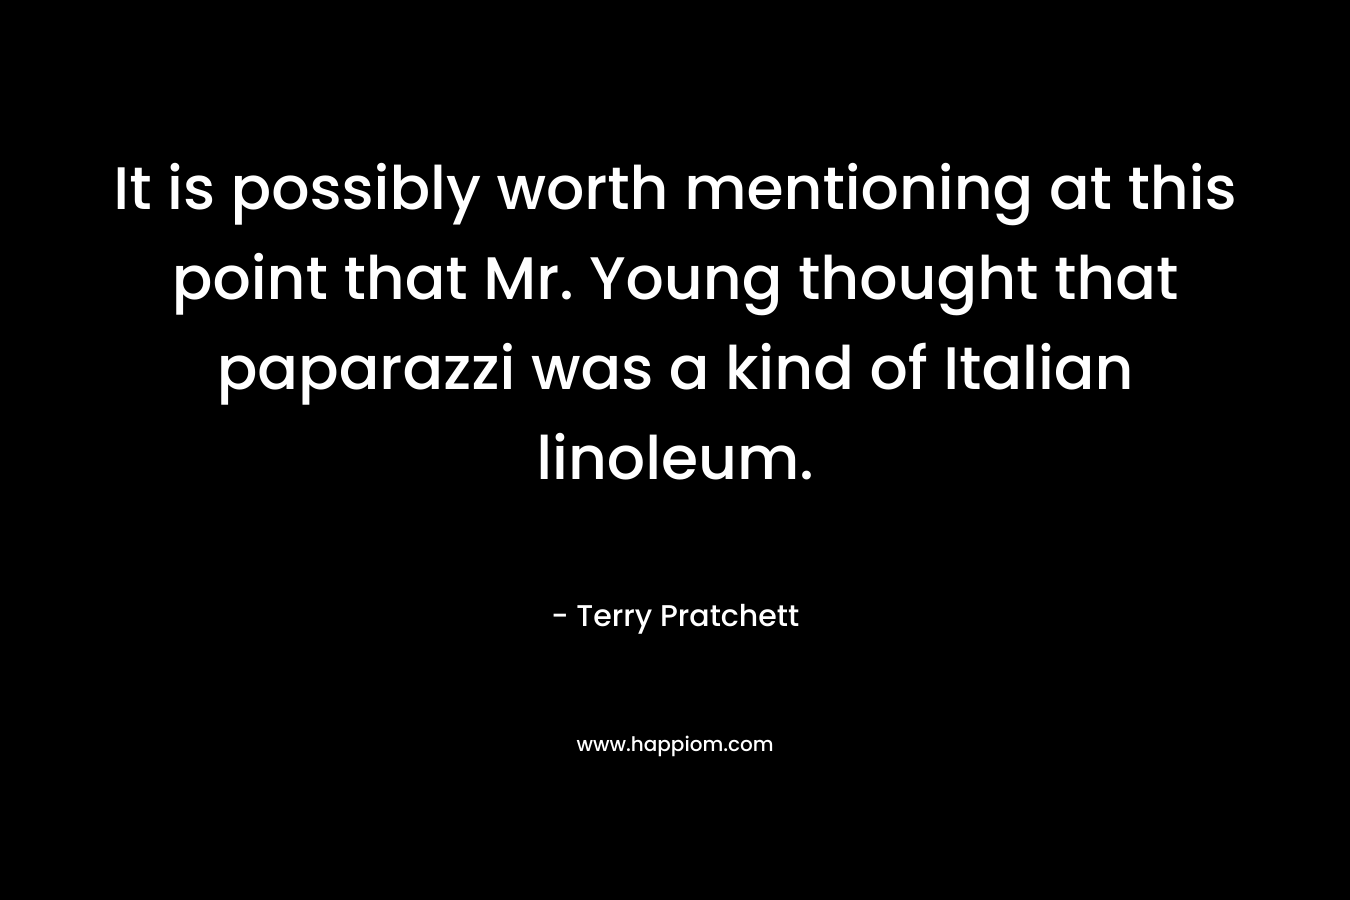 It is possibly worth mentioning at this point that Mr. Young thought that paparazzi was a kind of Italian linoleum. – Terry Pratchett